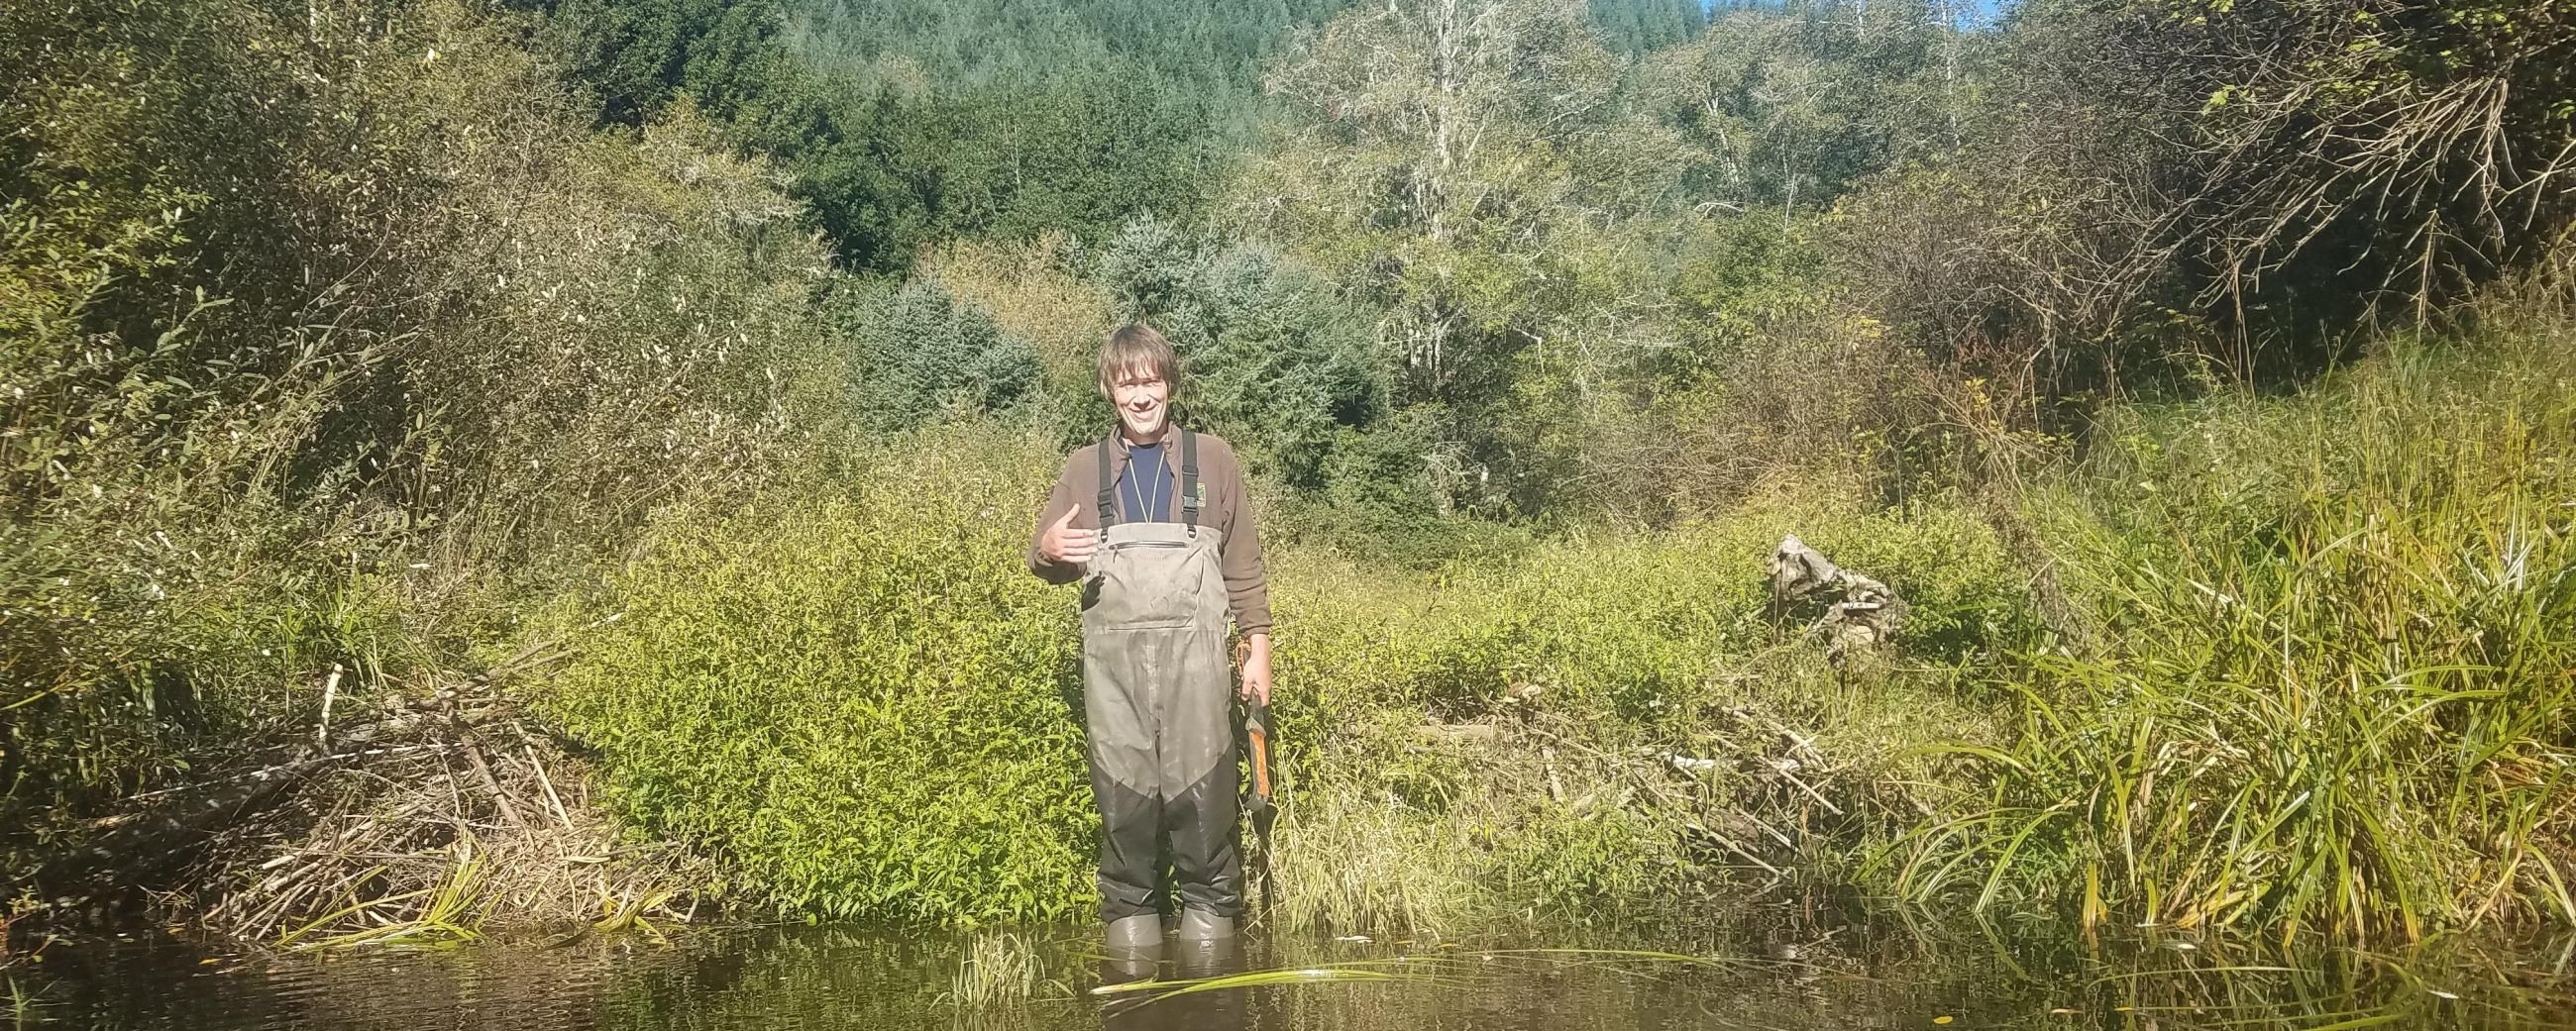 Surveyor stands in waders while holding a machete. He is standing in river water up to his ankles. Behind him is a grassy field and forest scene.